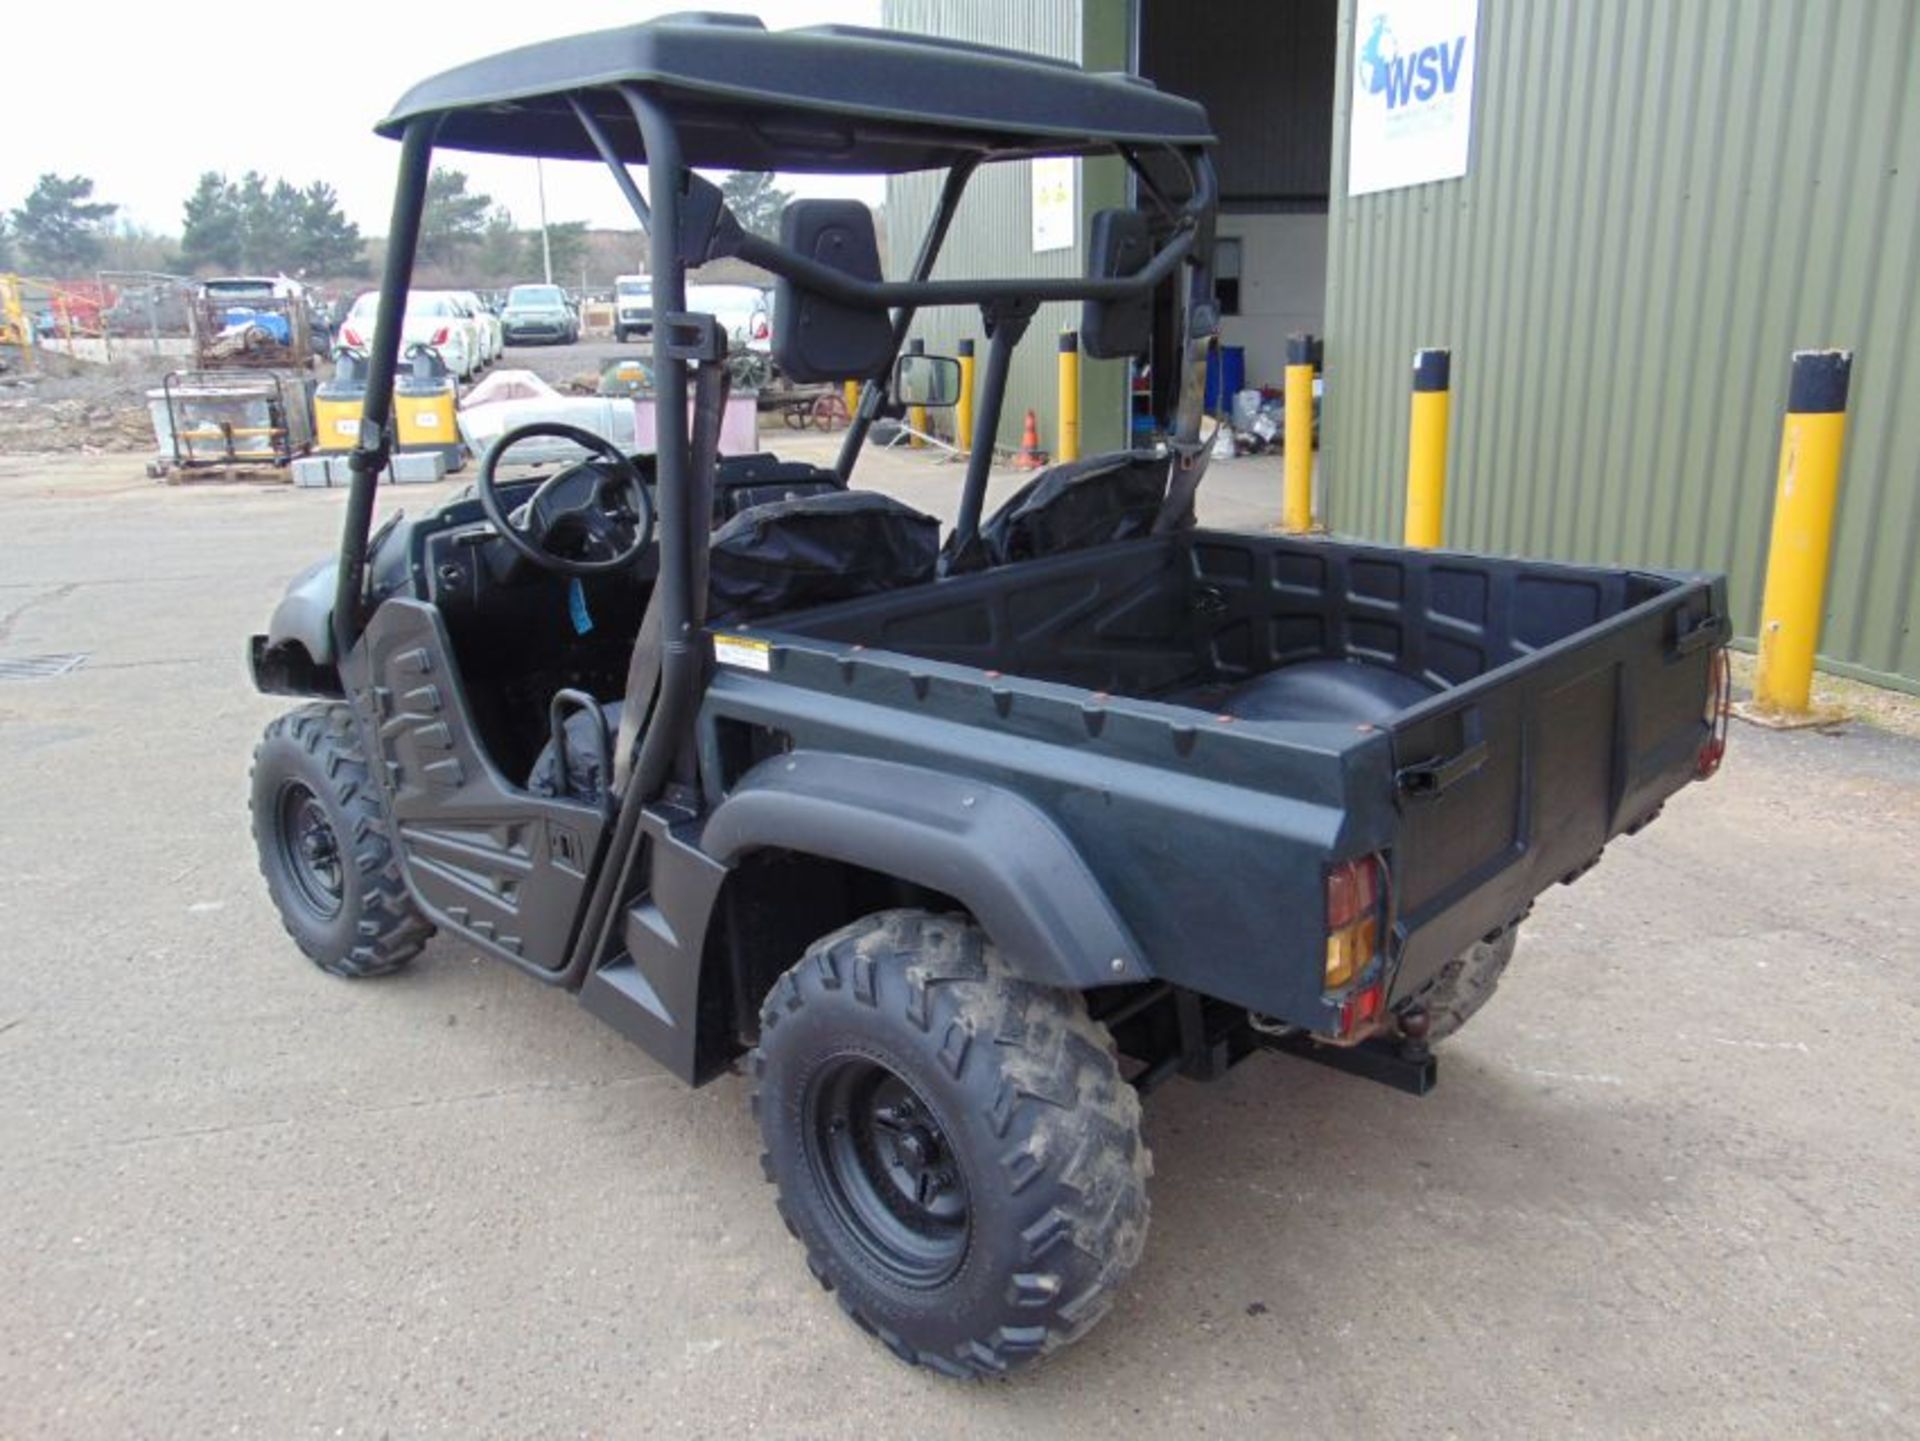 FARR 700 EFI Utility Vehicle ONLY 403 HOURS! - Image 8 of 22